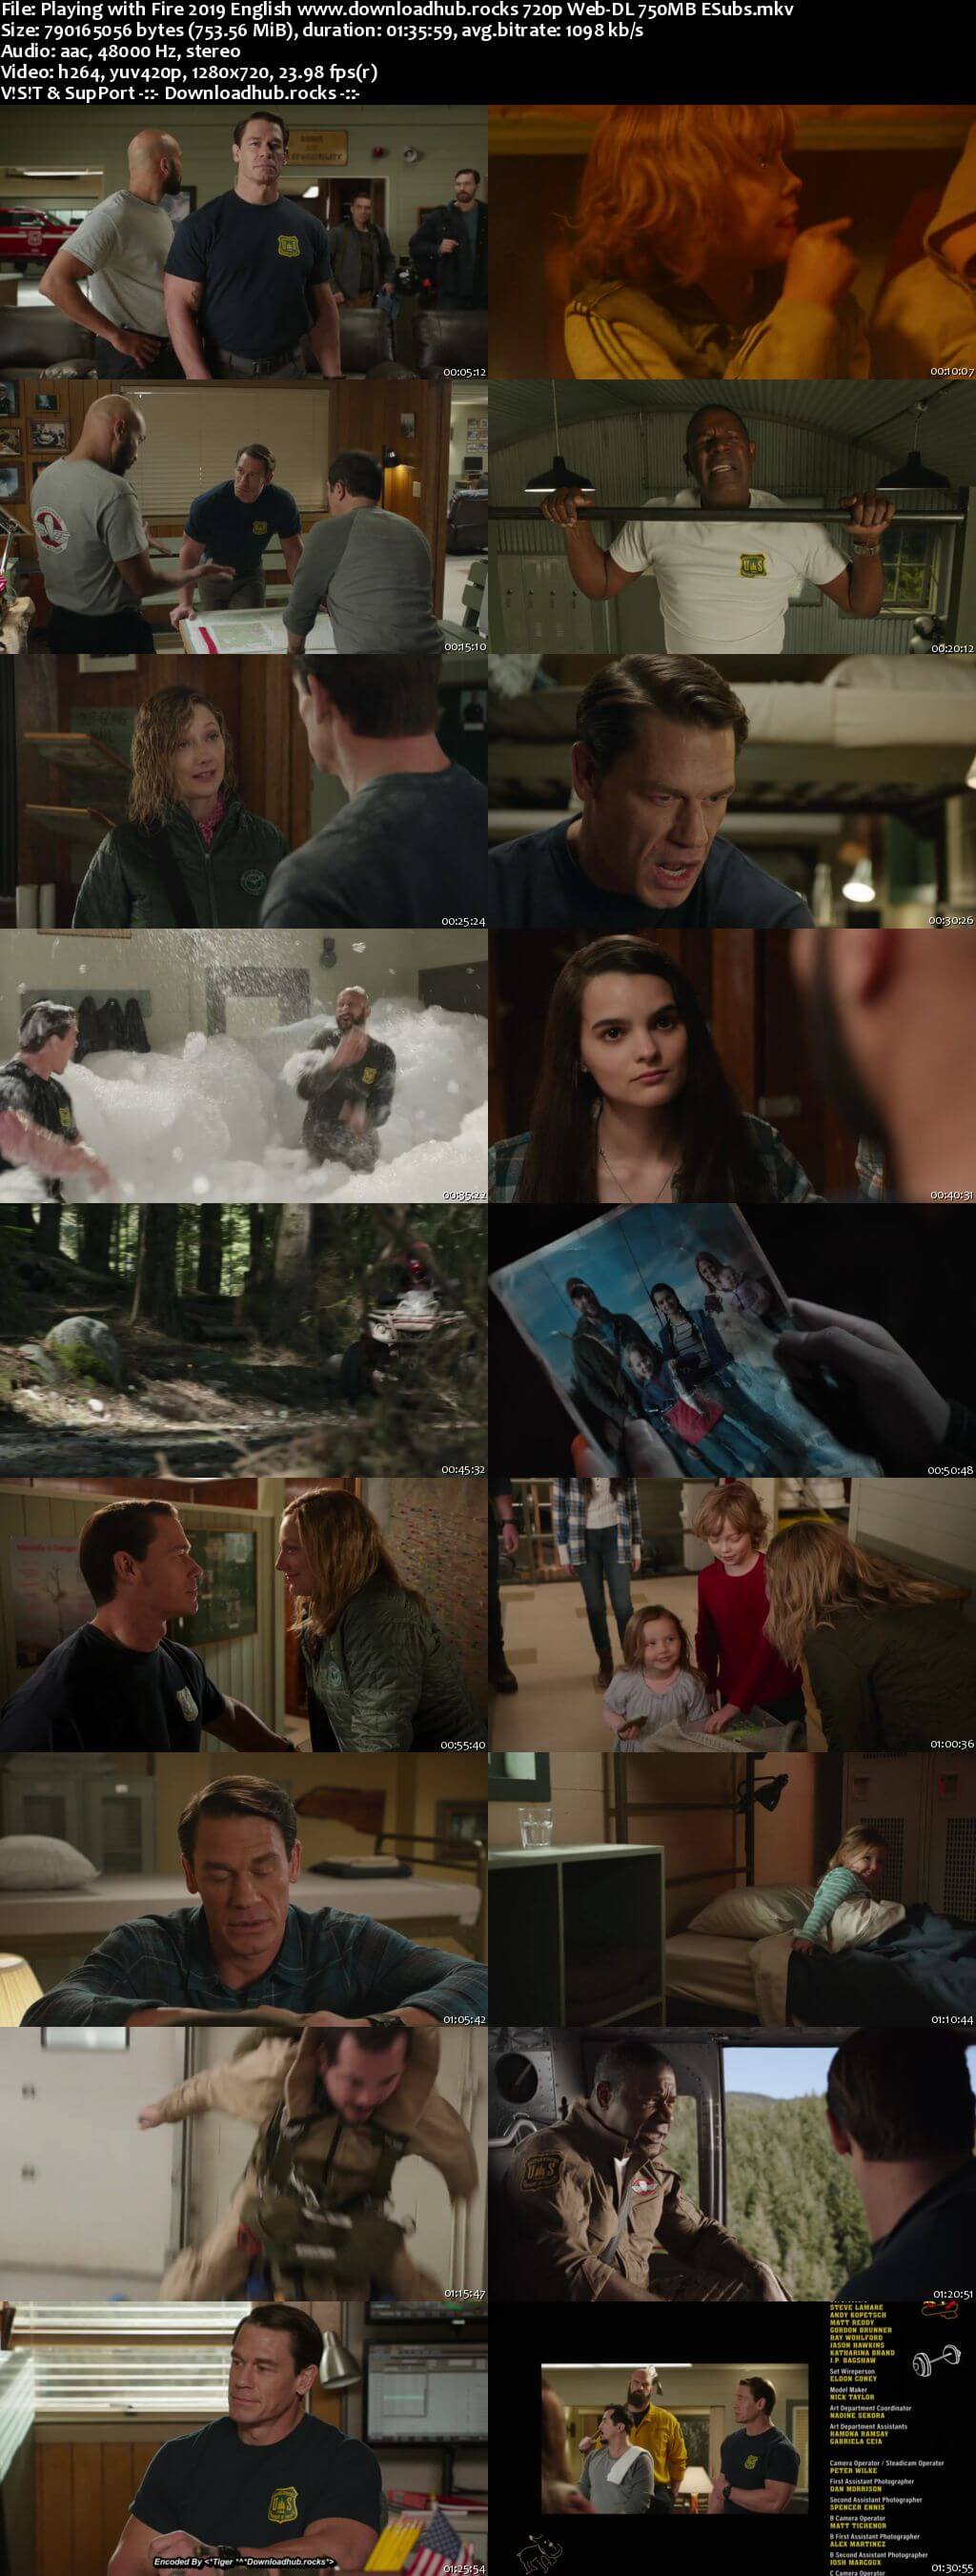 Playing with Fire 2019 English 720p Web-DL 750MB ESubs